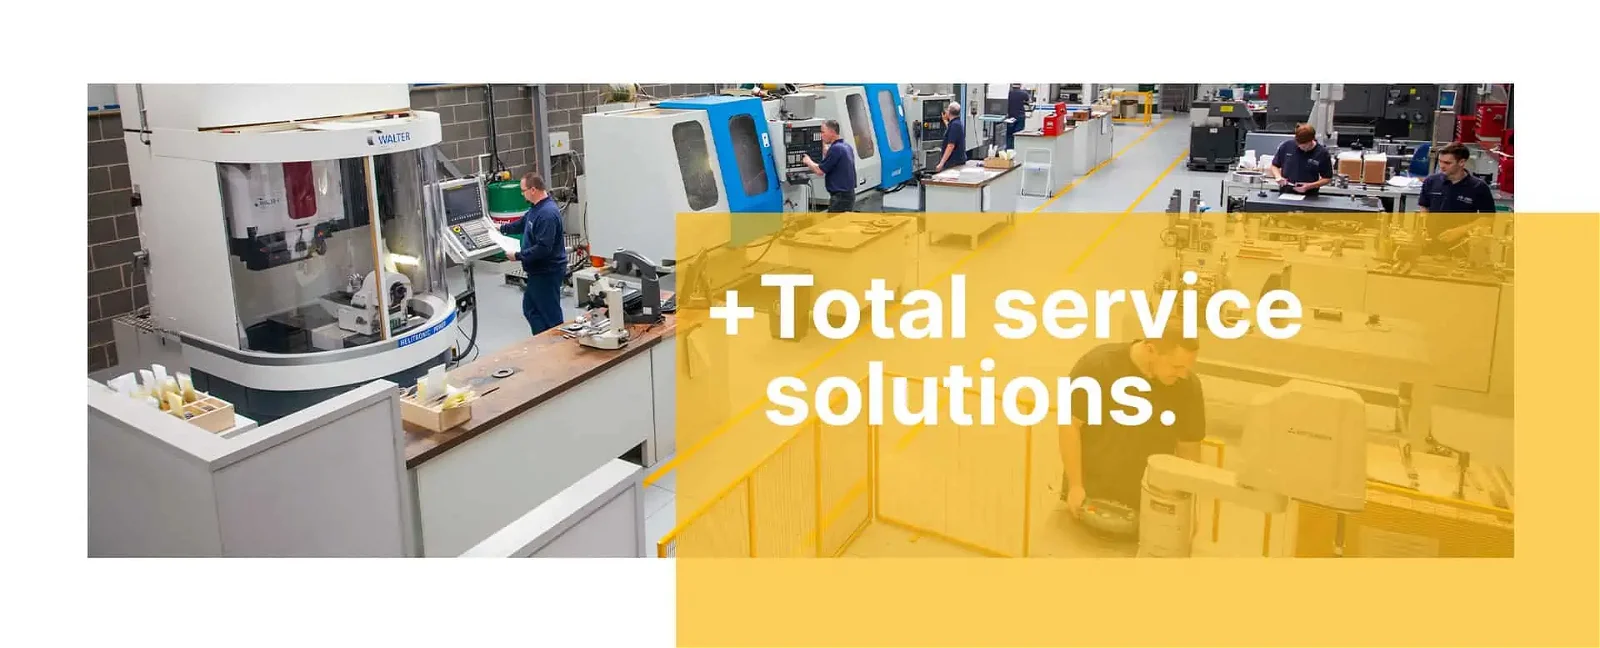 Service - Total service solutions